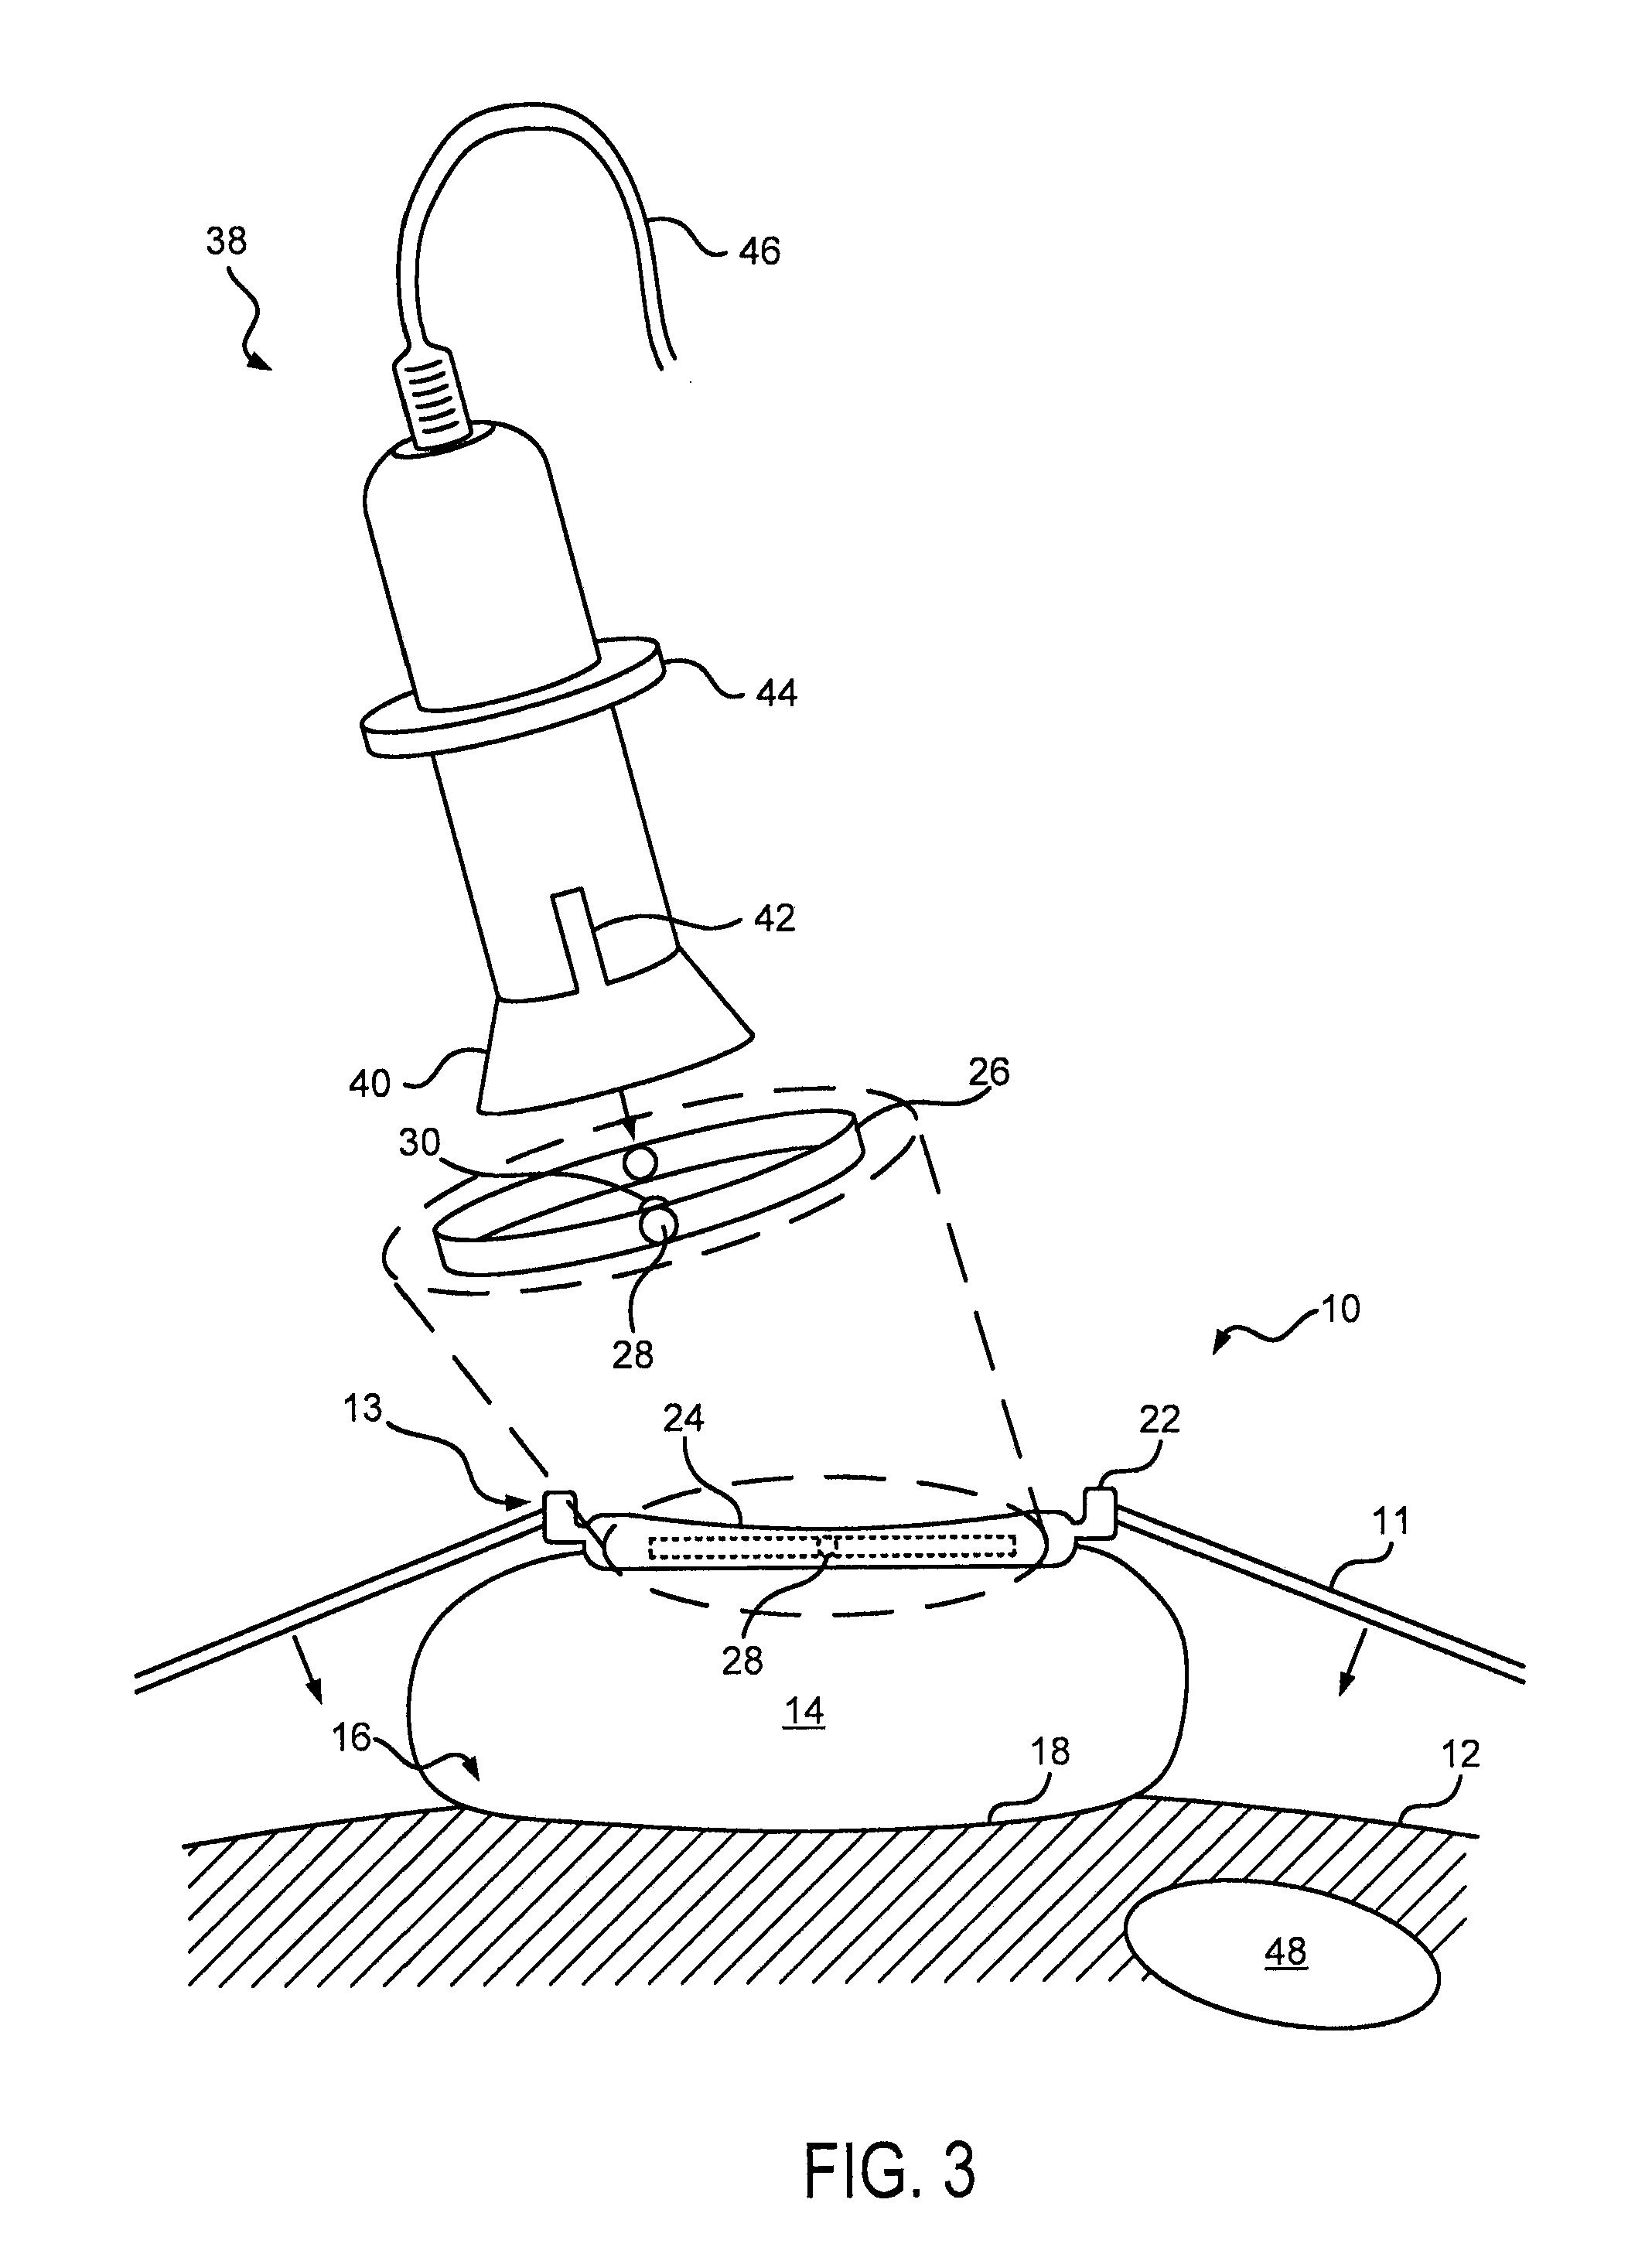 System and Method for Fetal Heart Monitoring Using Ultrasound